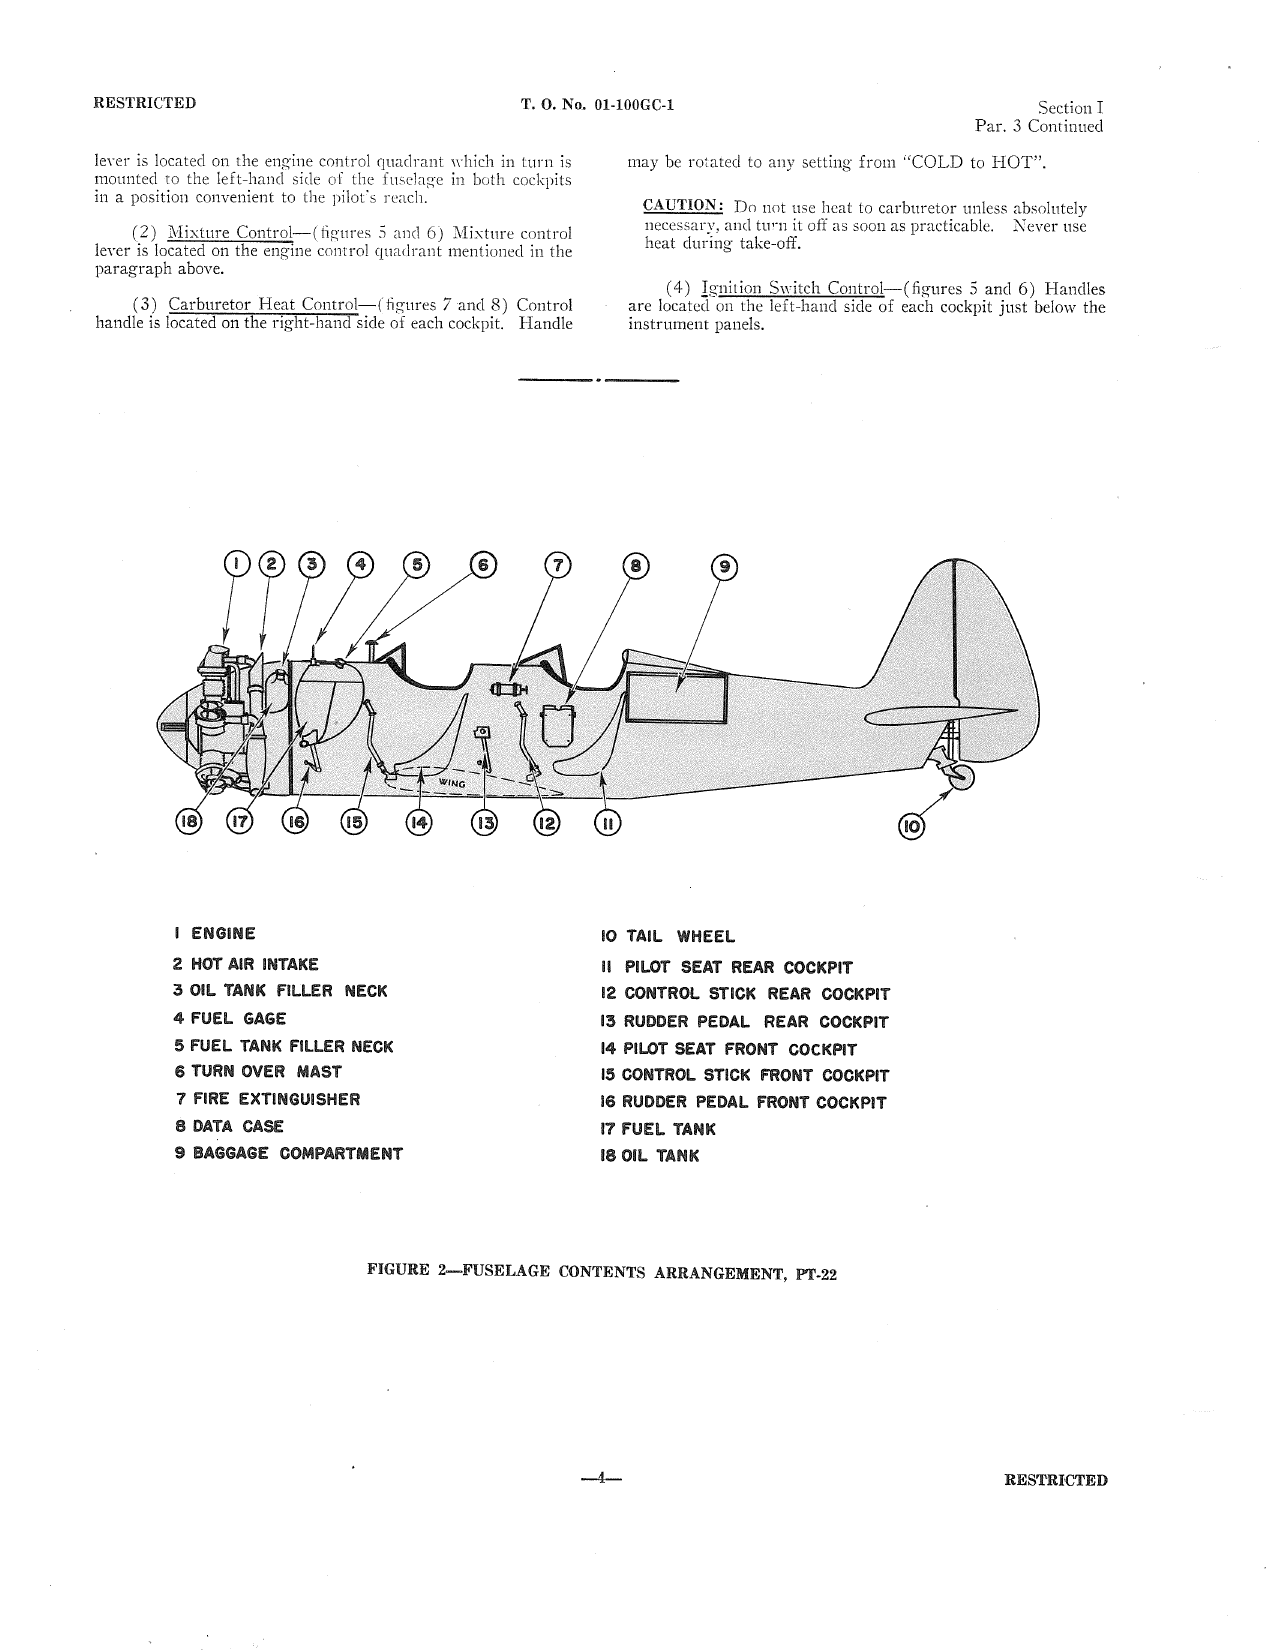 Sample page 8 from AirCorps Library document: Pilot's Flight Operating Instructions for Army Model PT-22 Airplanes